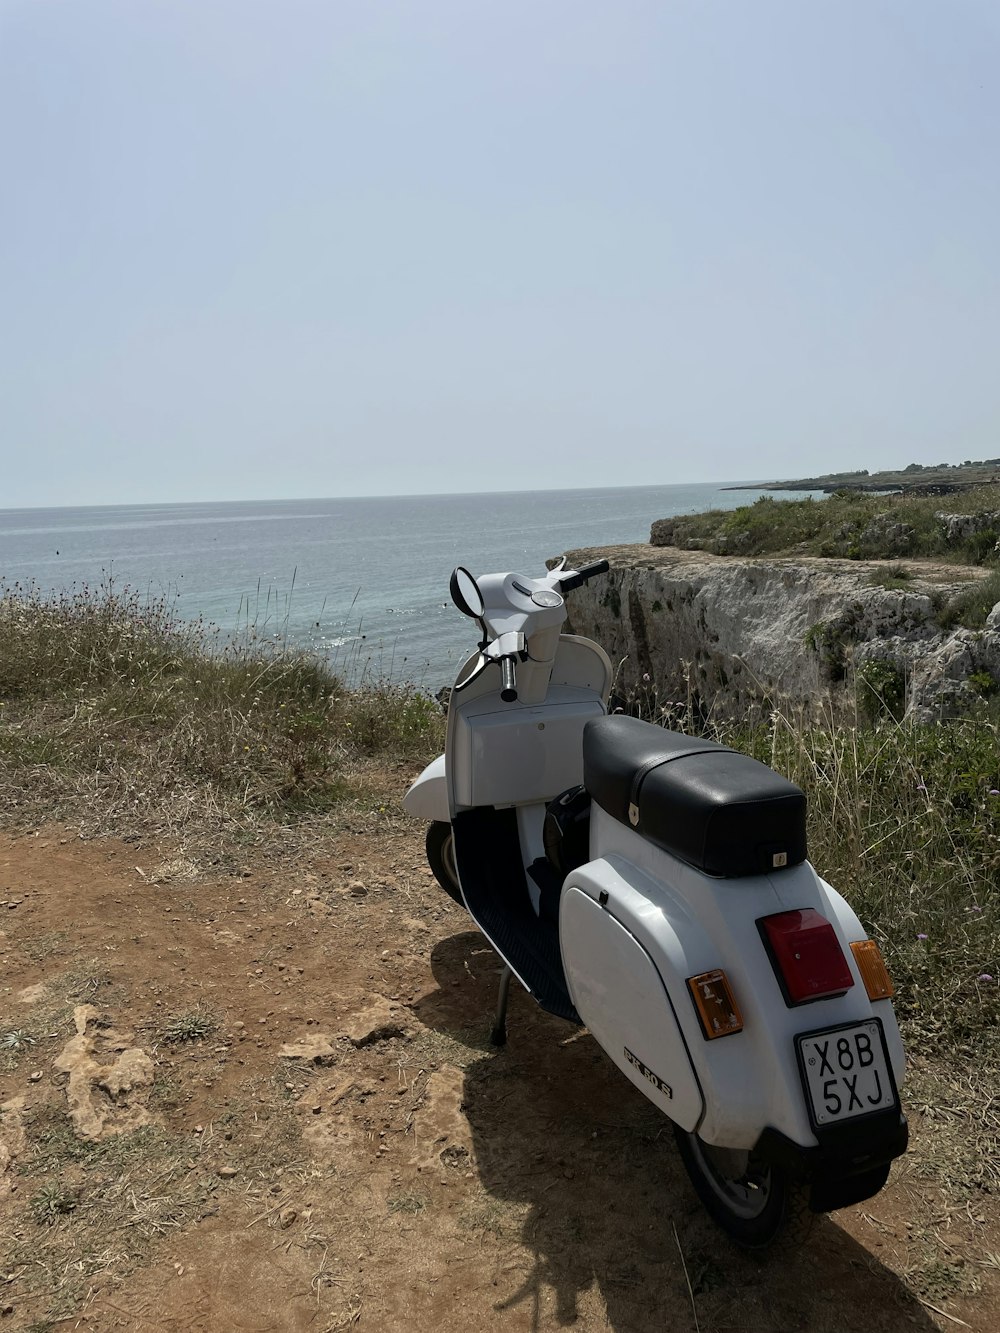 a scooter parked on the side of a dirt road near the ocean